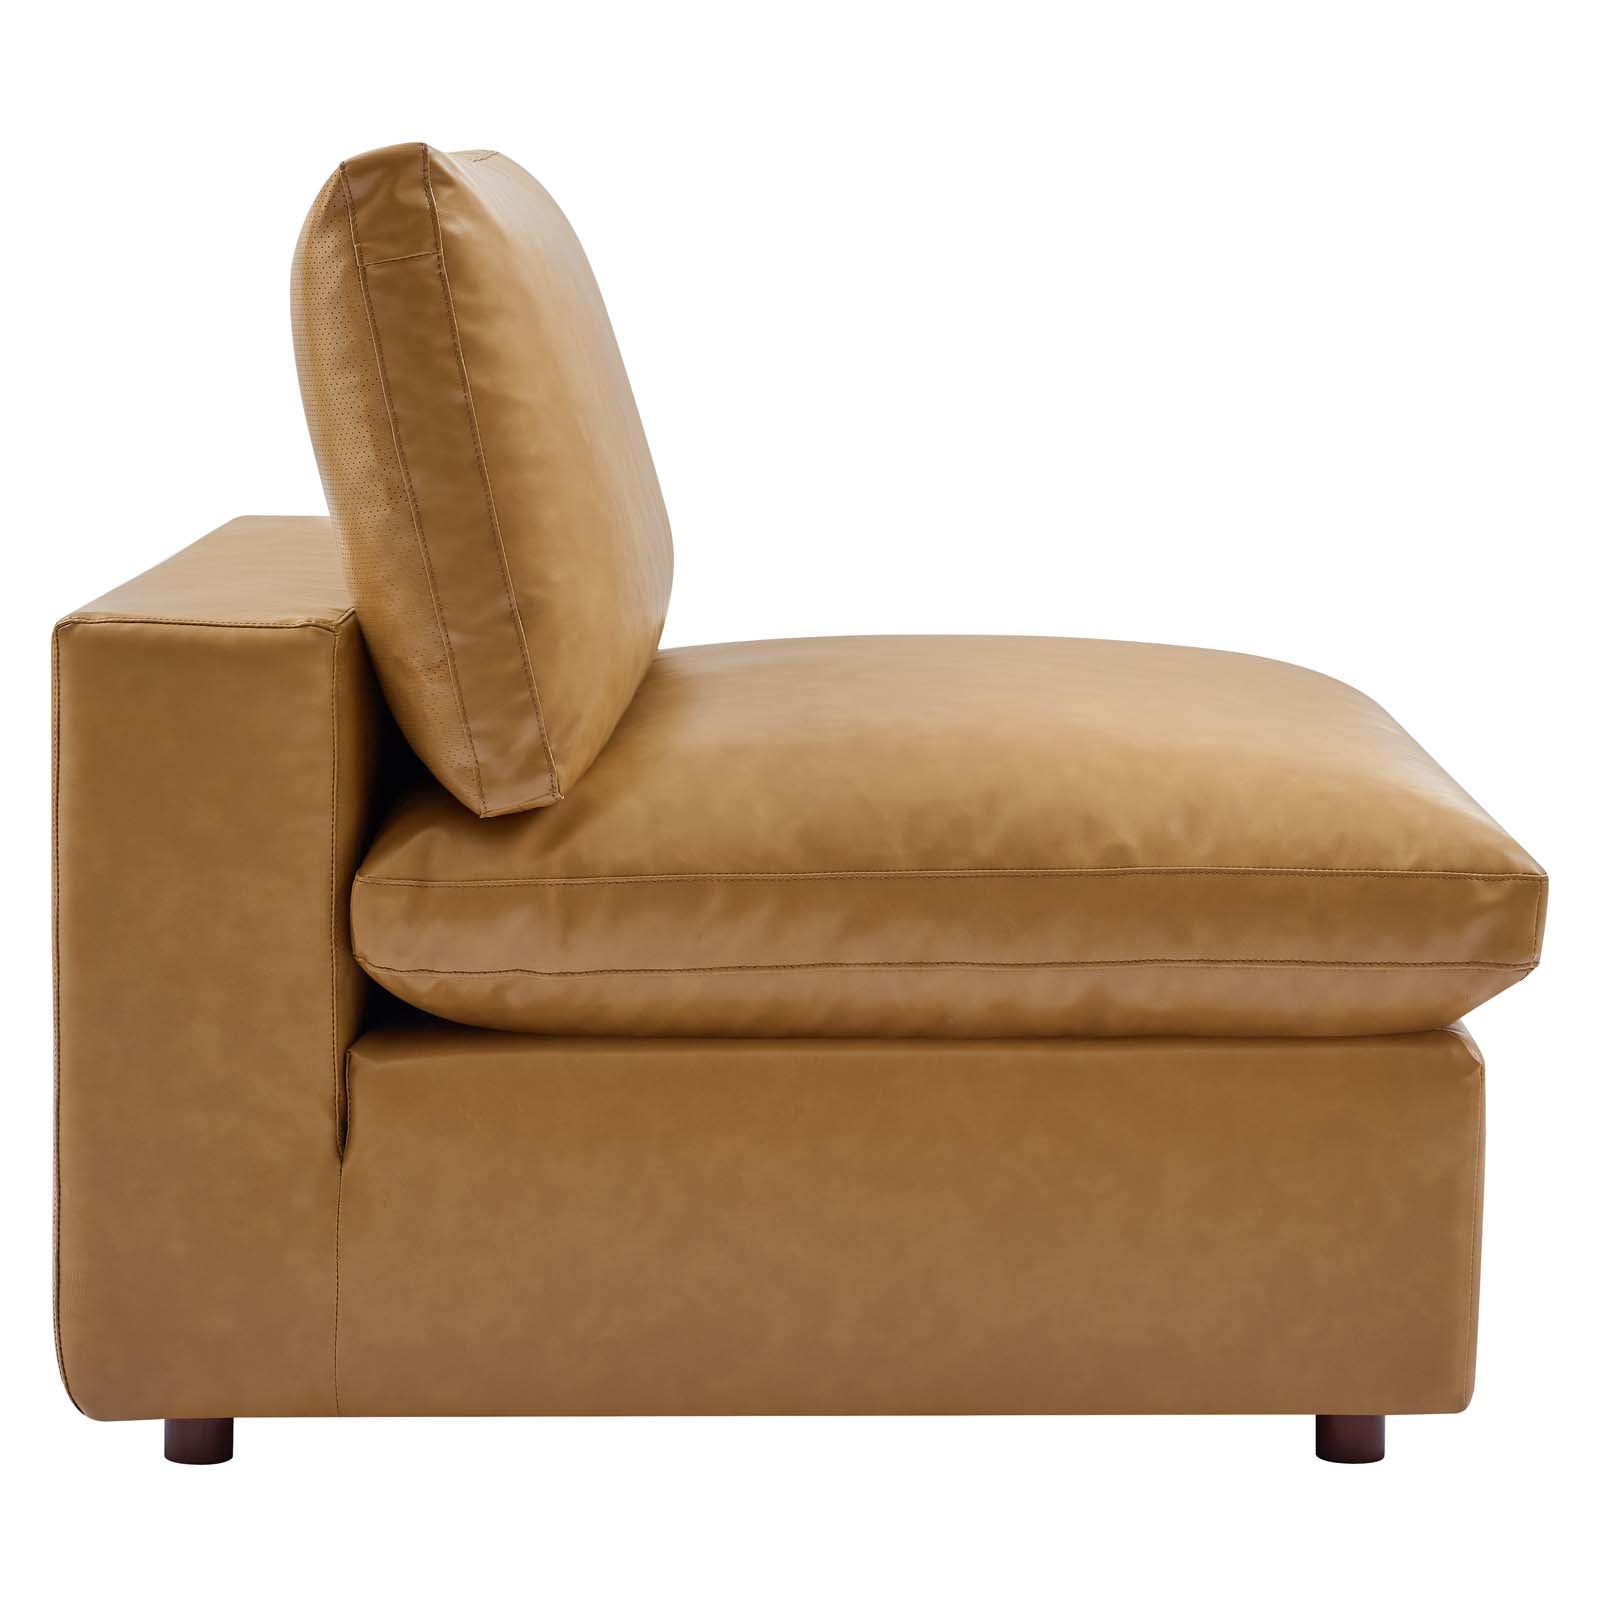 Modway Sofas & Couches - Commix Down Filled Overstuffed Vegan Leather 3 Seater Sofa Tan